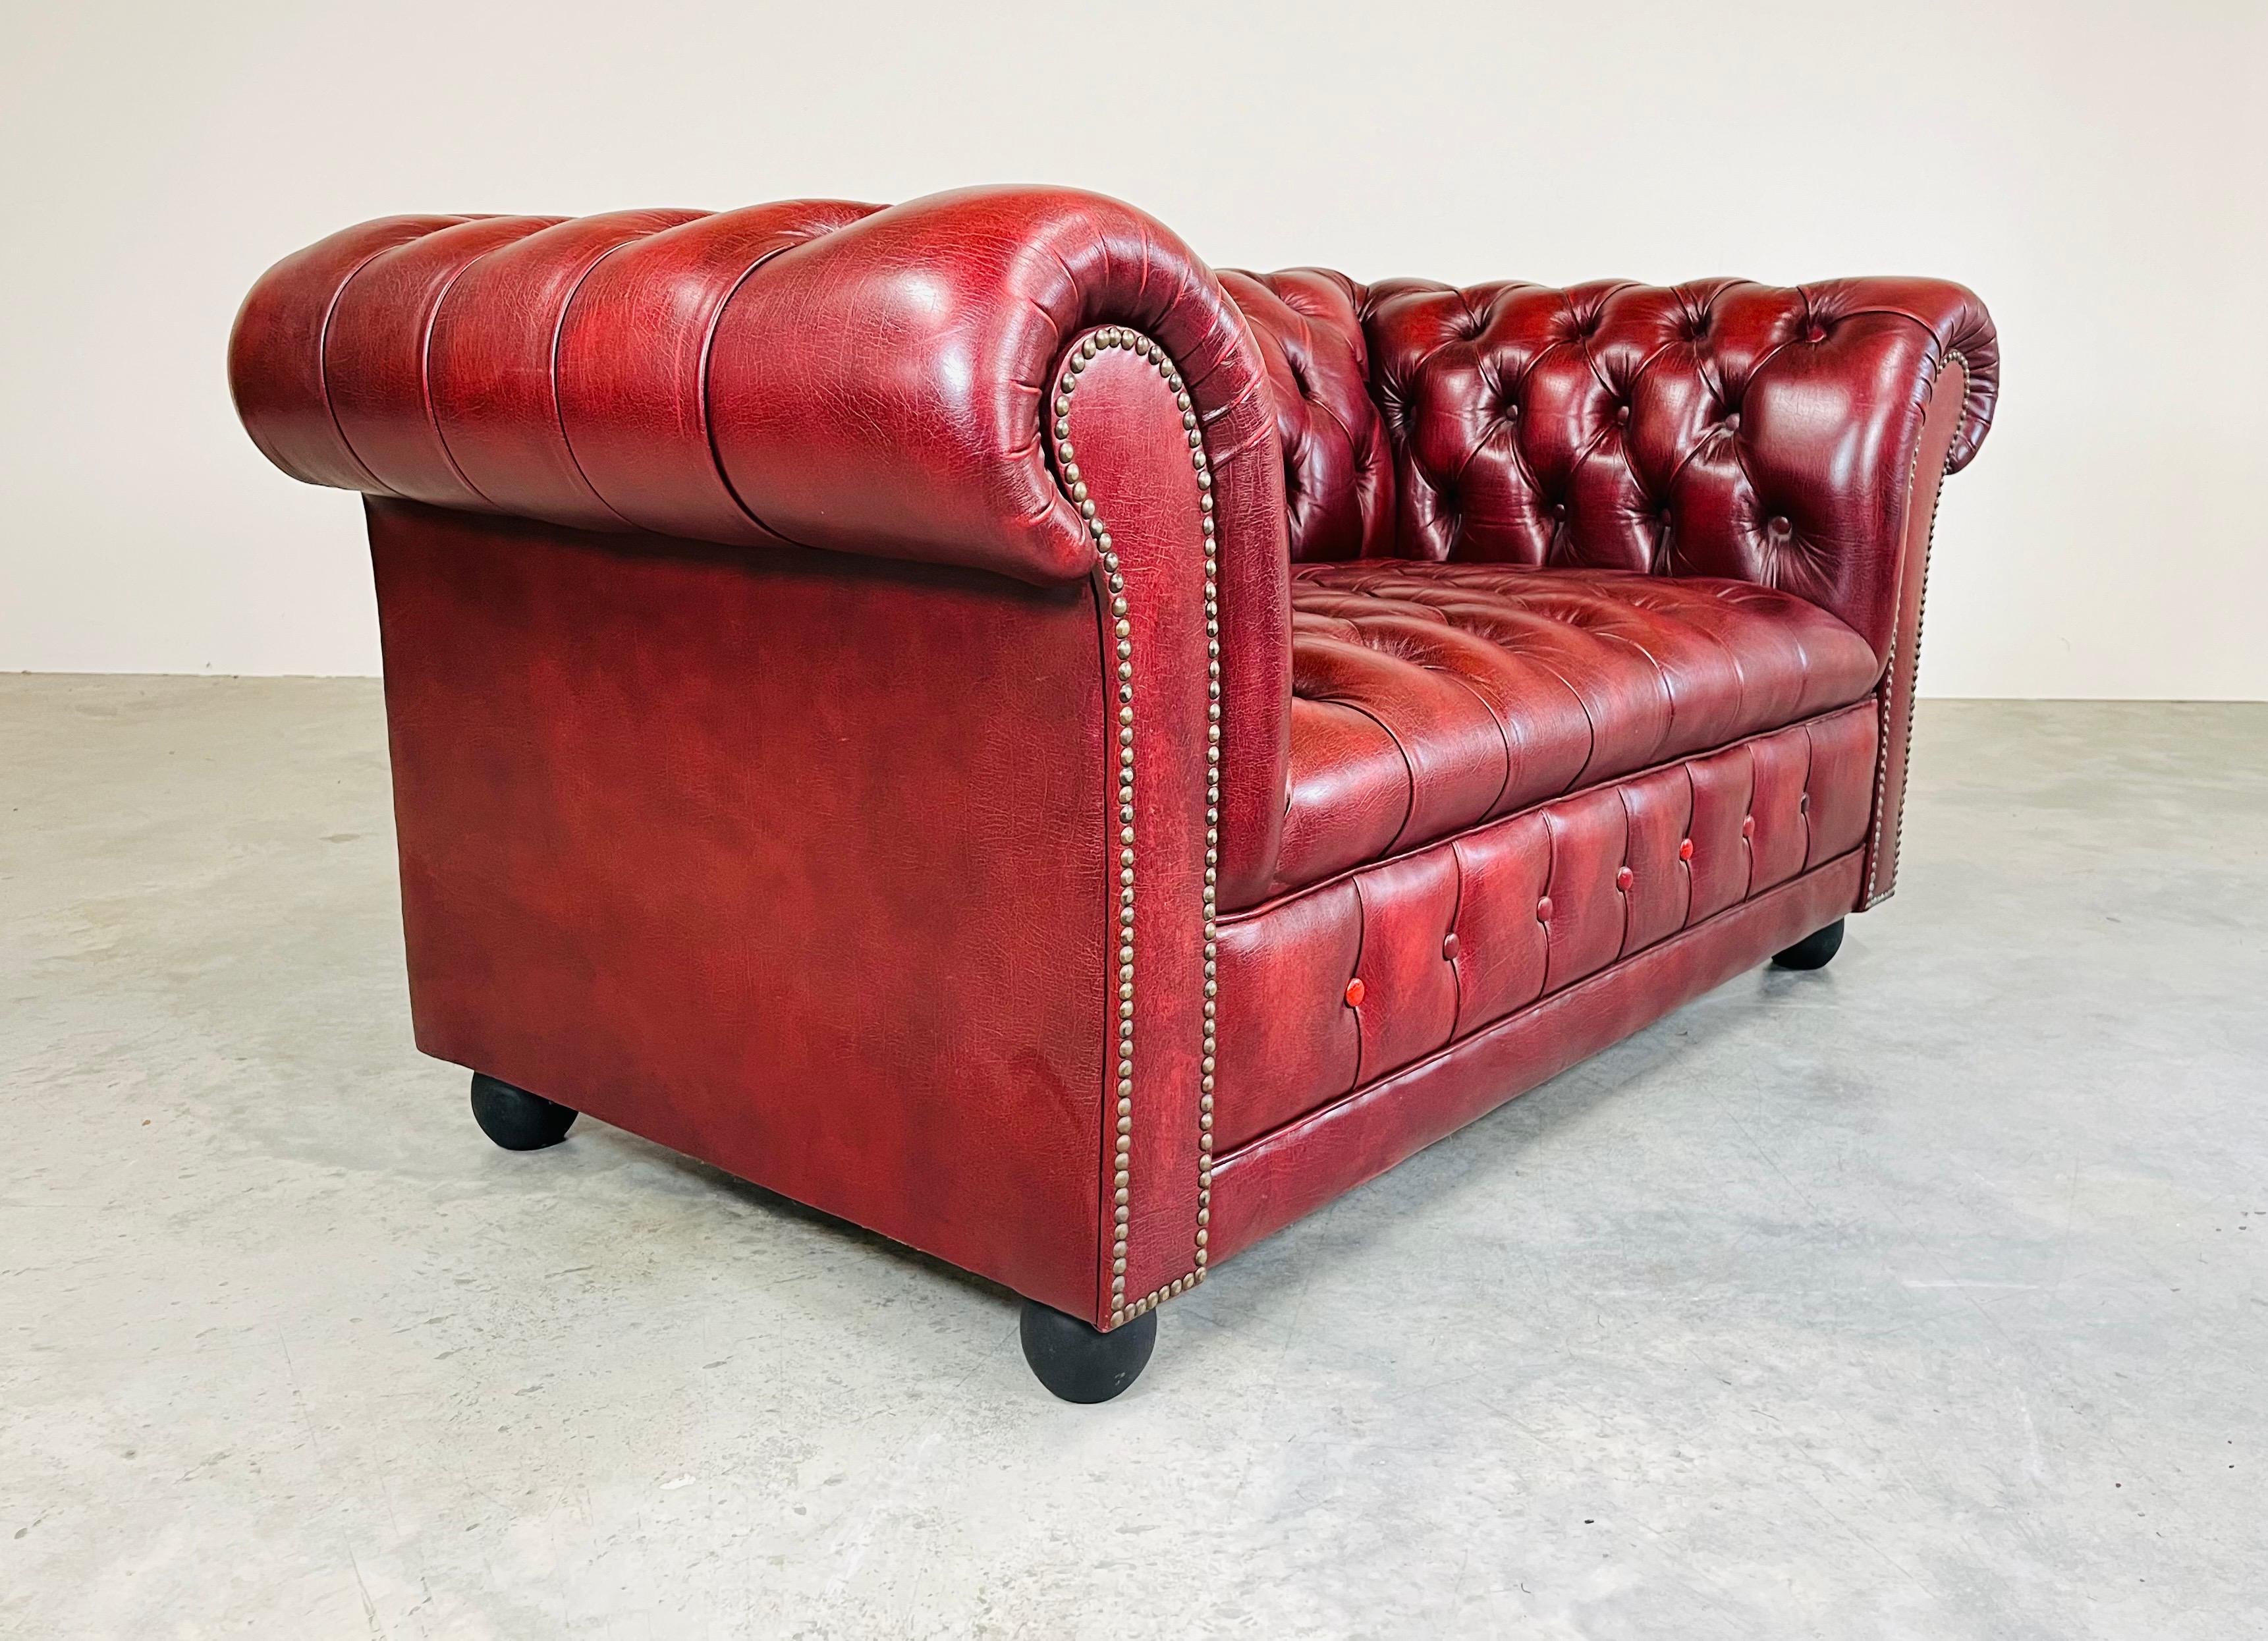 English Oxblood Chesterfield Tufted Leather Love Seat Sofa -Great Britain Circa 1970